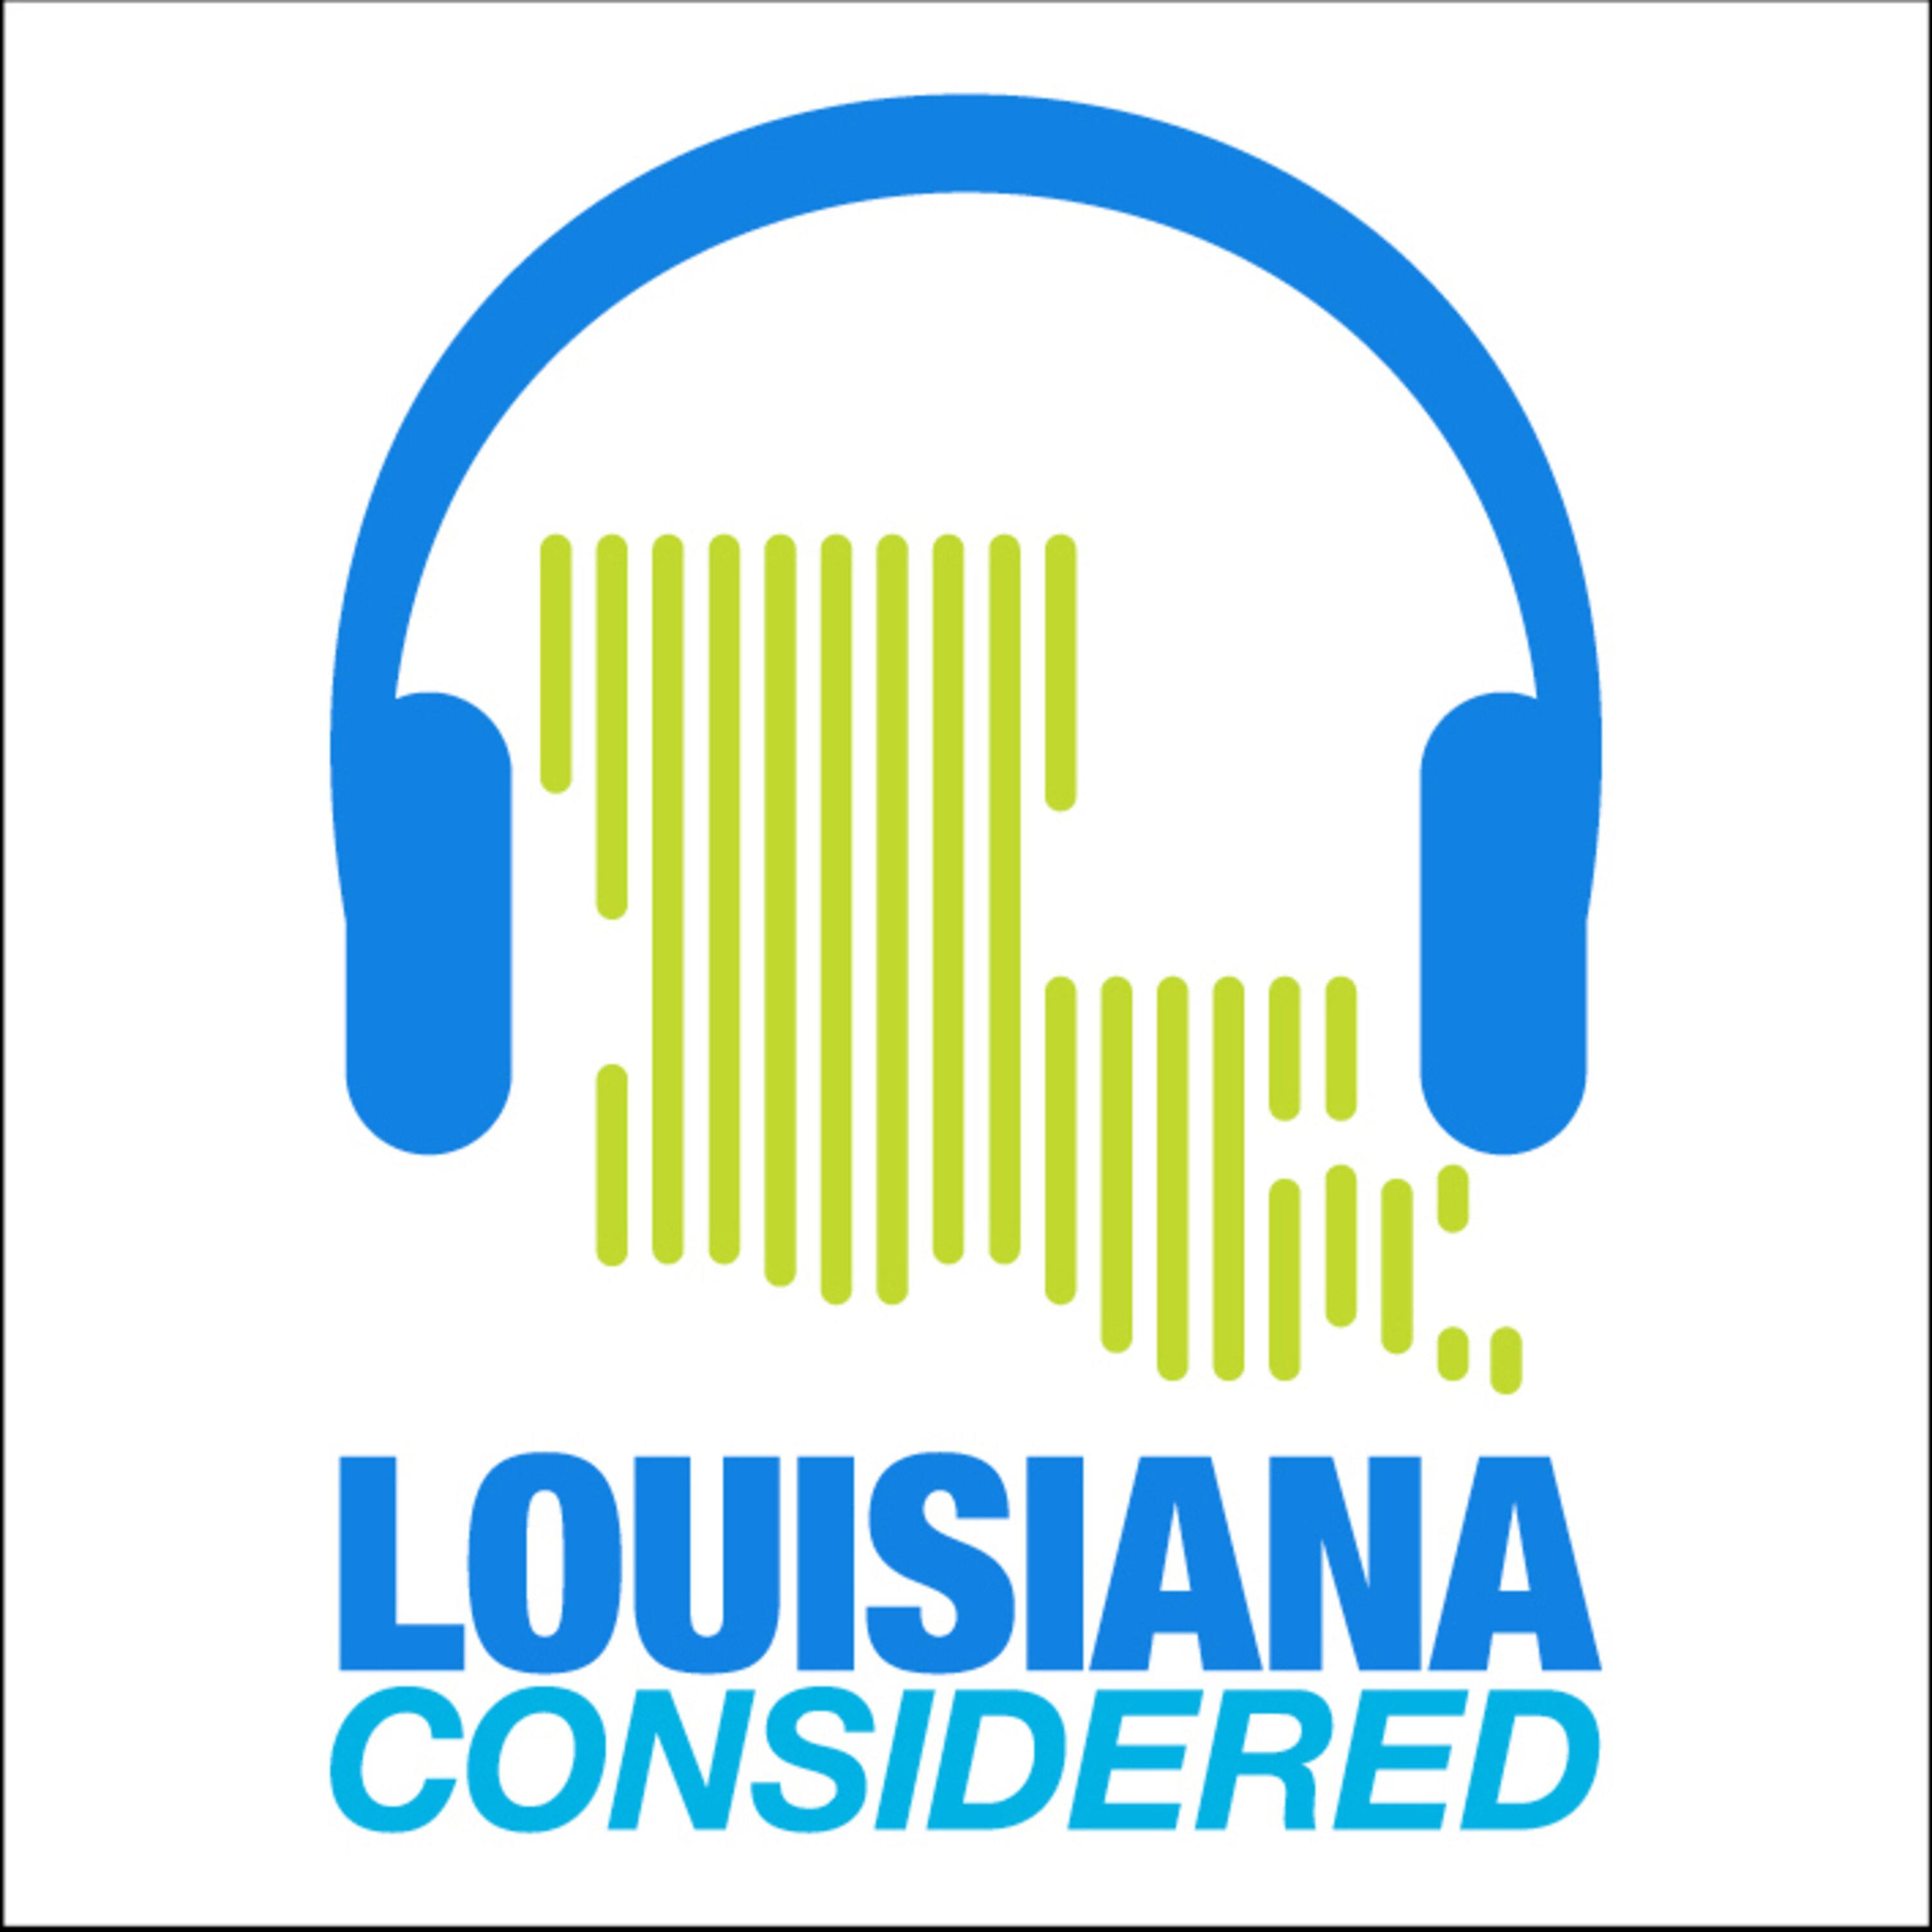 Thumbnail for "Louisiana Considered: A look at Louisiana's rollout of flower in the medical marijuana program".